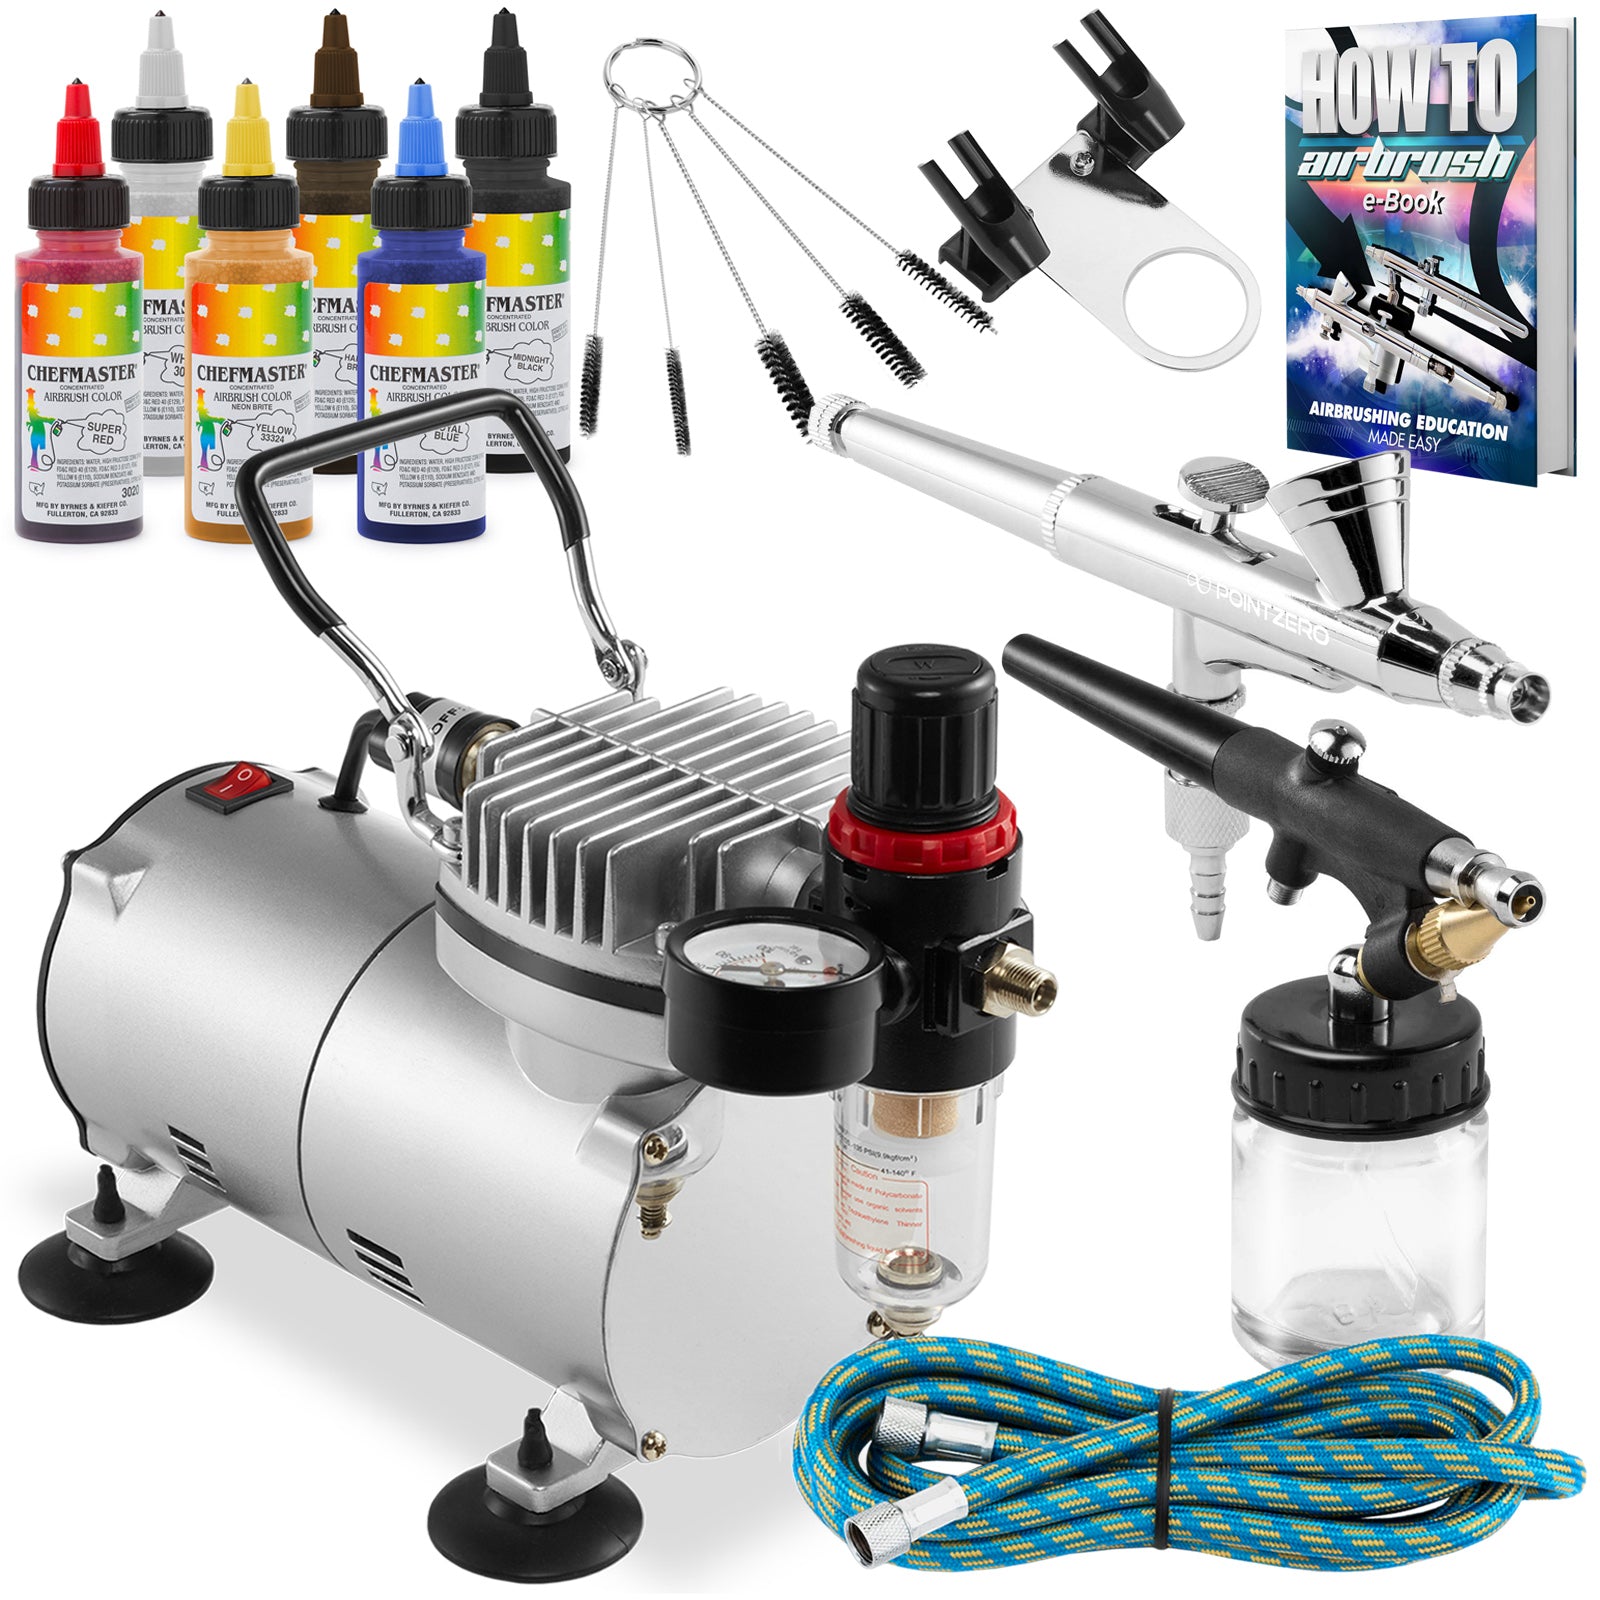 Air Pump Spray Gun, 0.3mm Nozzle 2 Levels Adjustable Pressure Low Vibration  Power Display Auto Start Stop Mini Airbrush Kit for Model Painting :  : Tools & Home Improvement